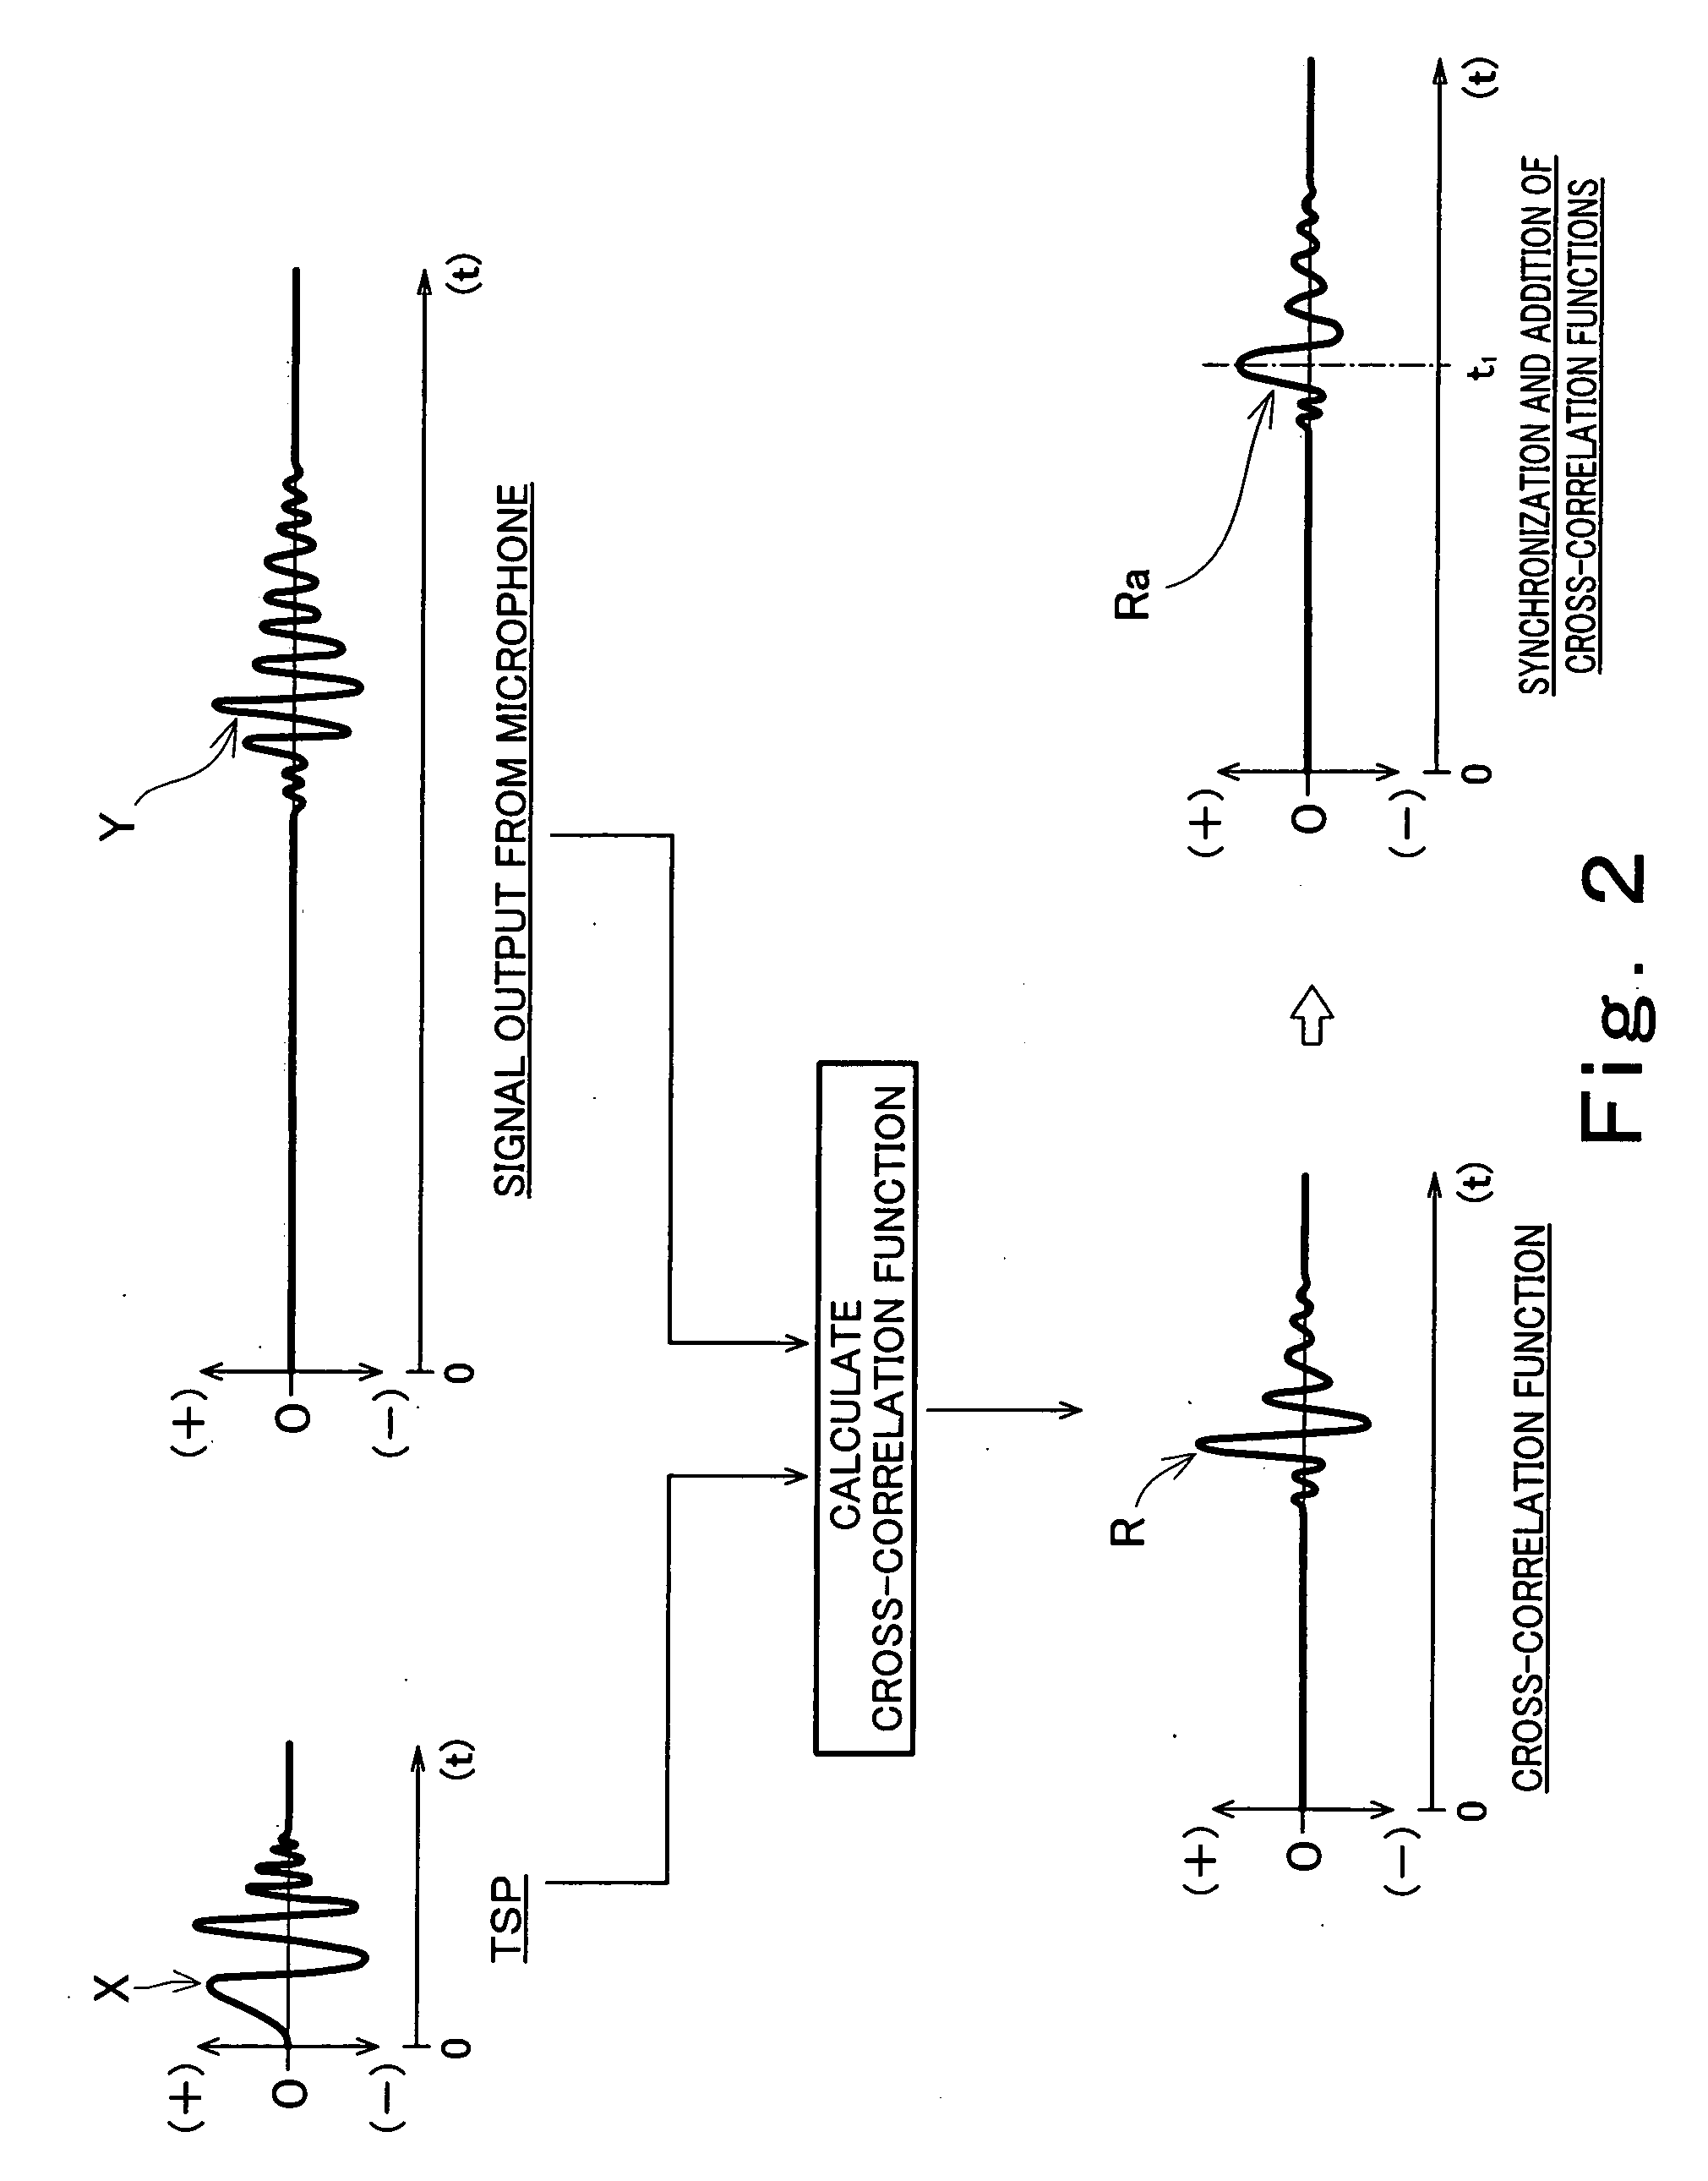 Method and device for measuring sound wave propagation time between loudspeaker and microphone